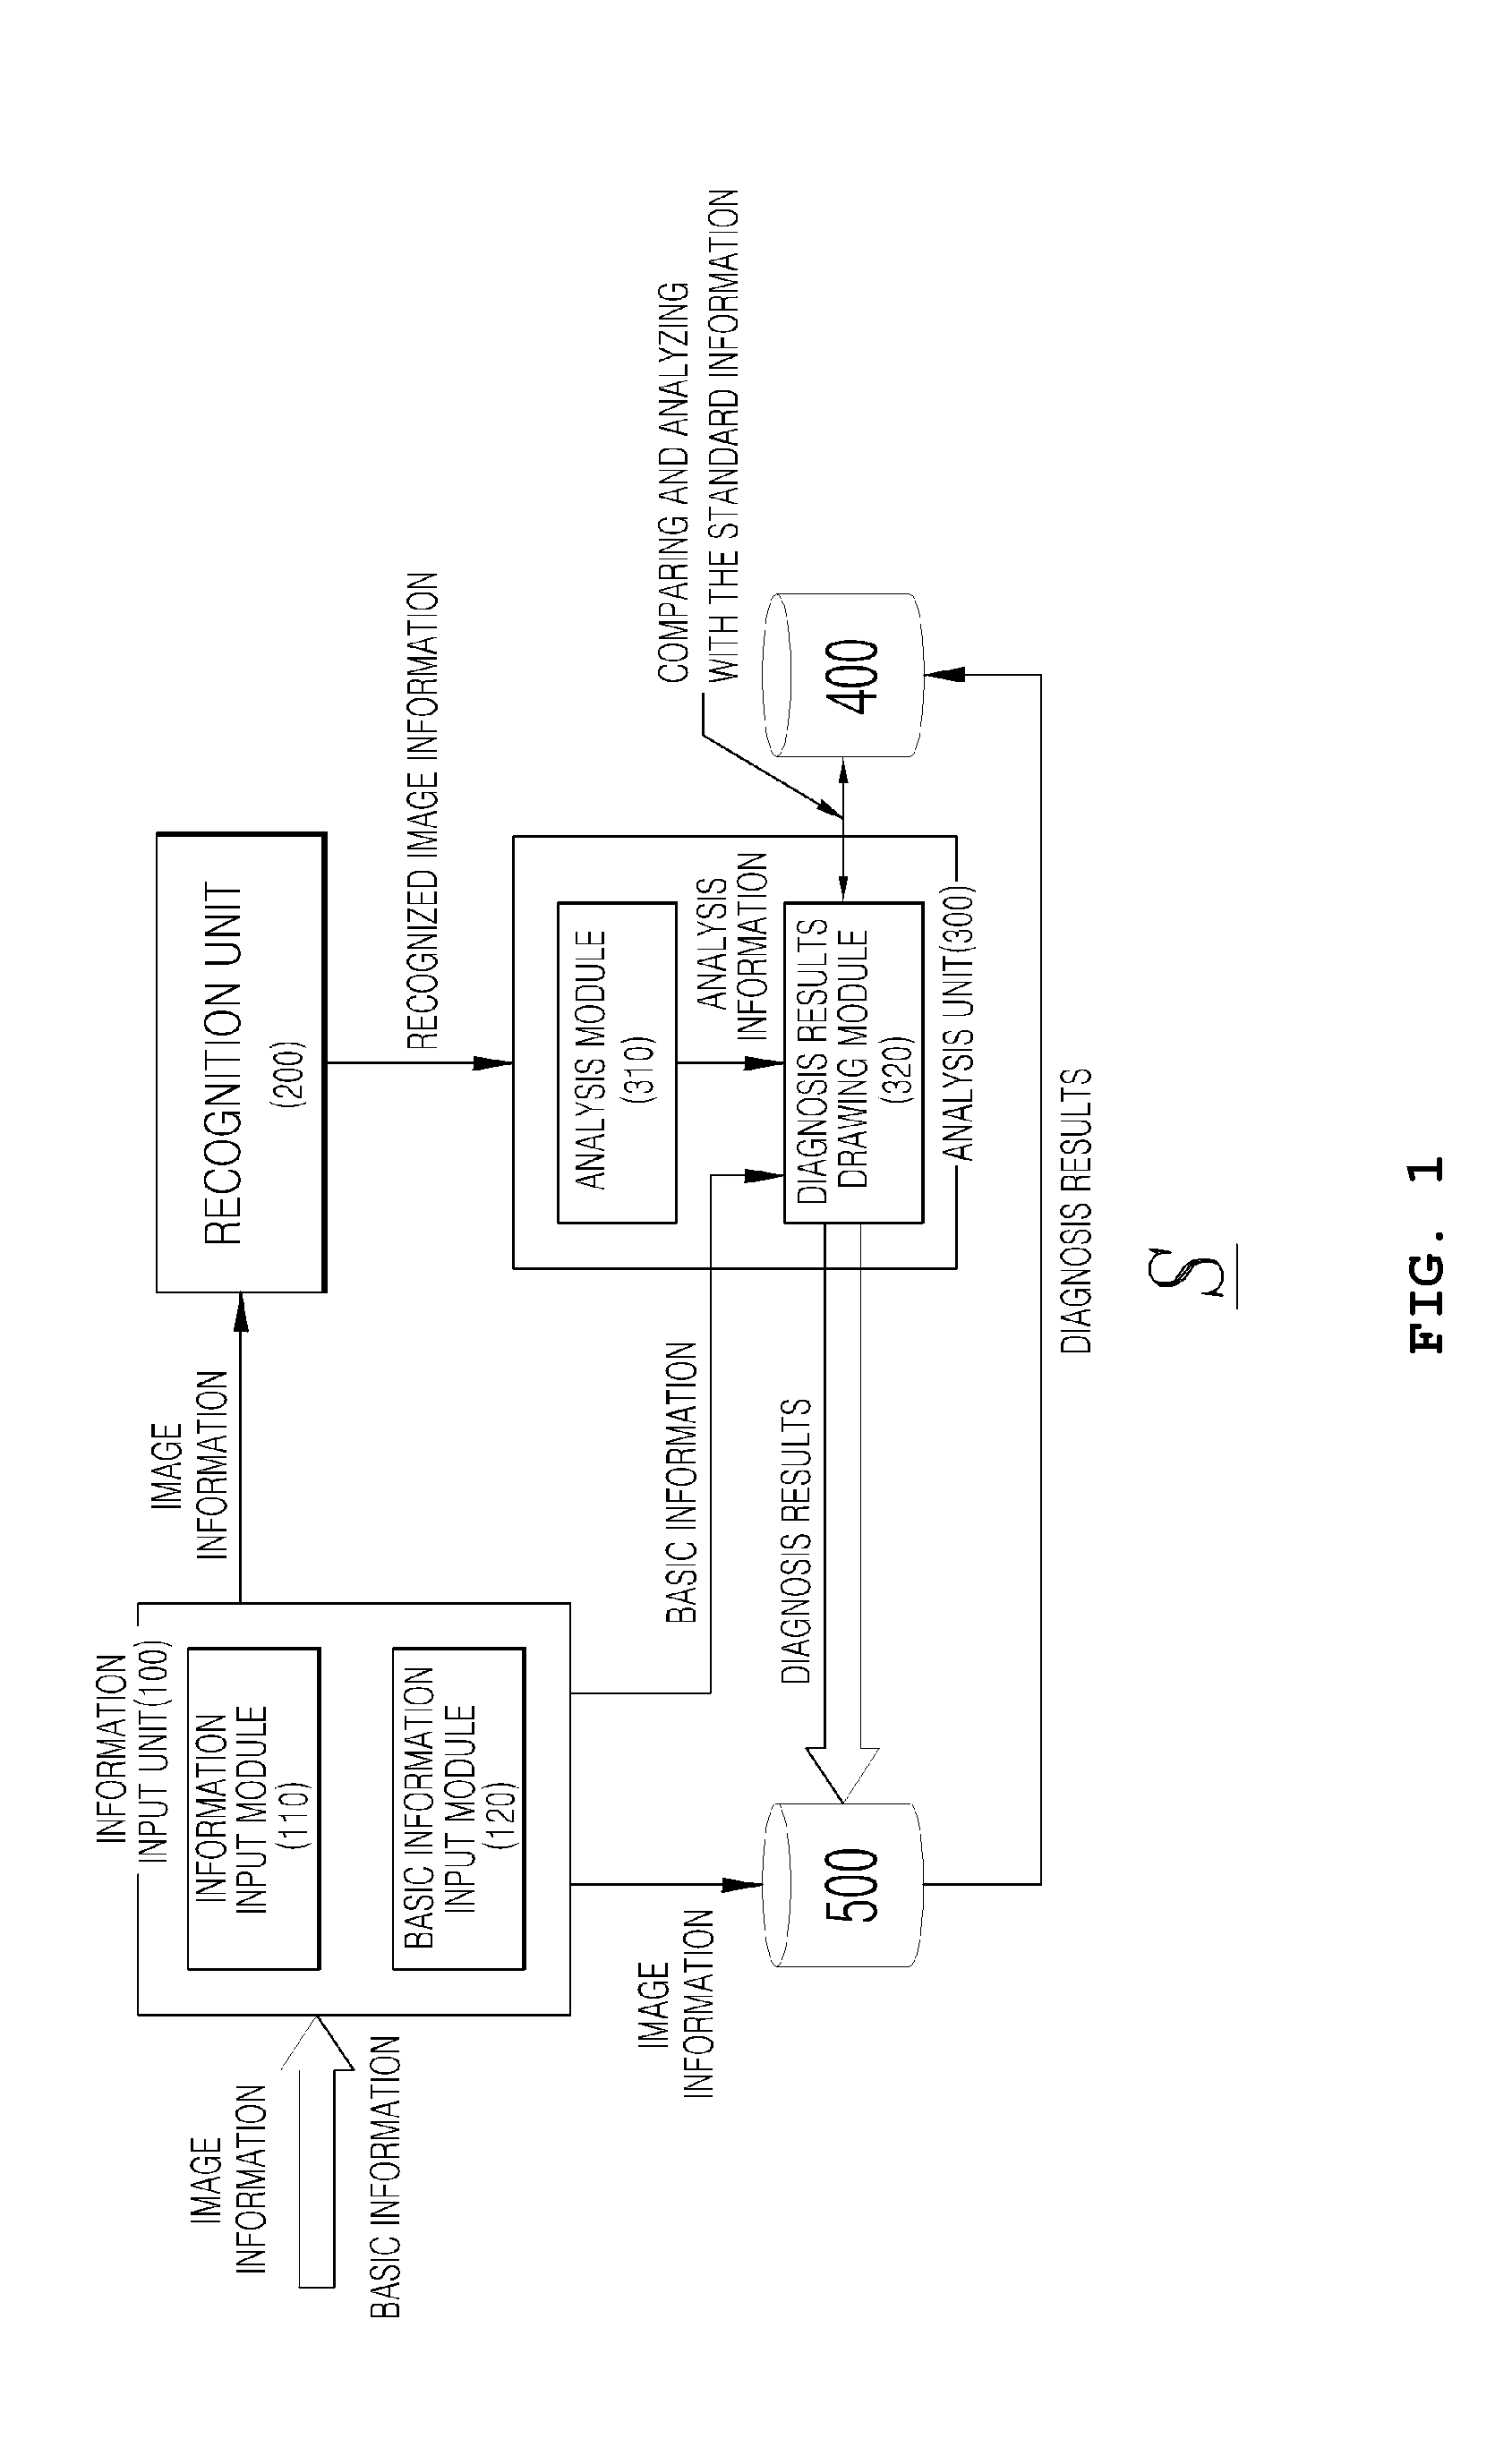 Health diagnosis system using image information